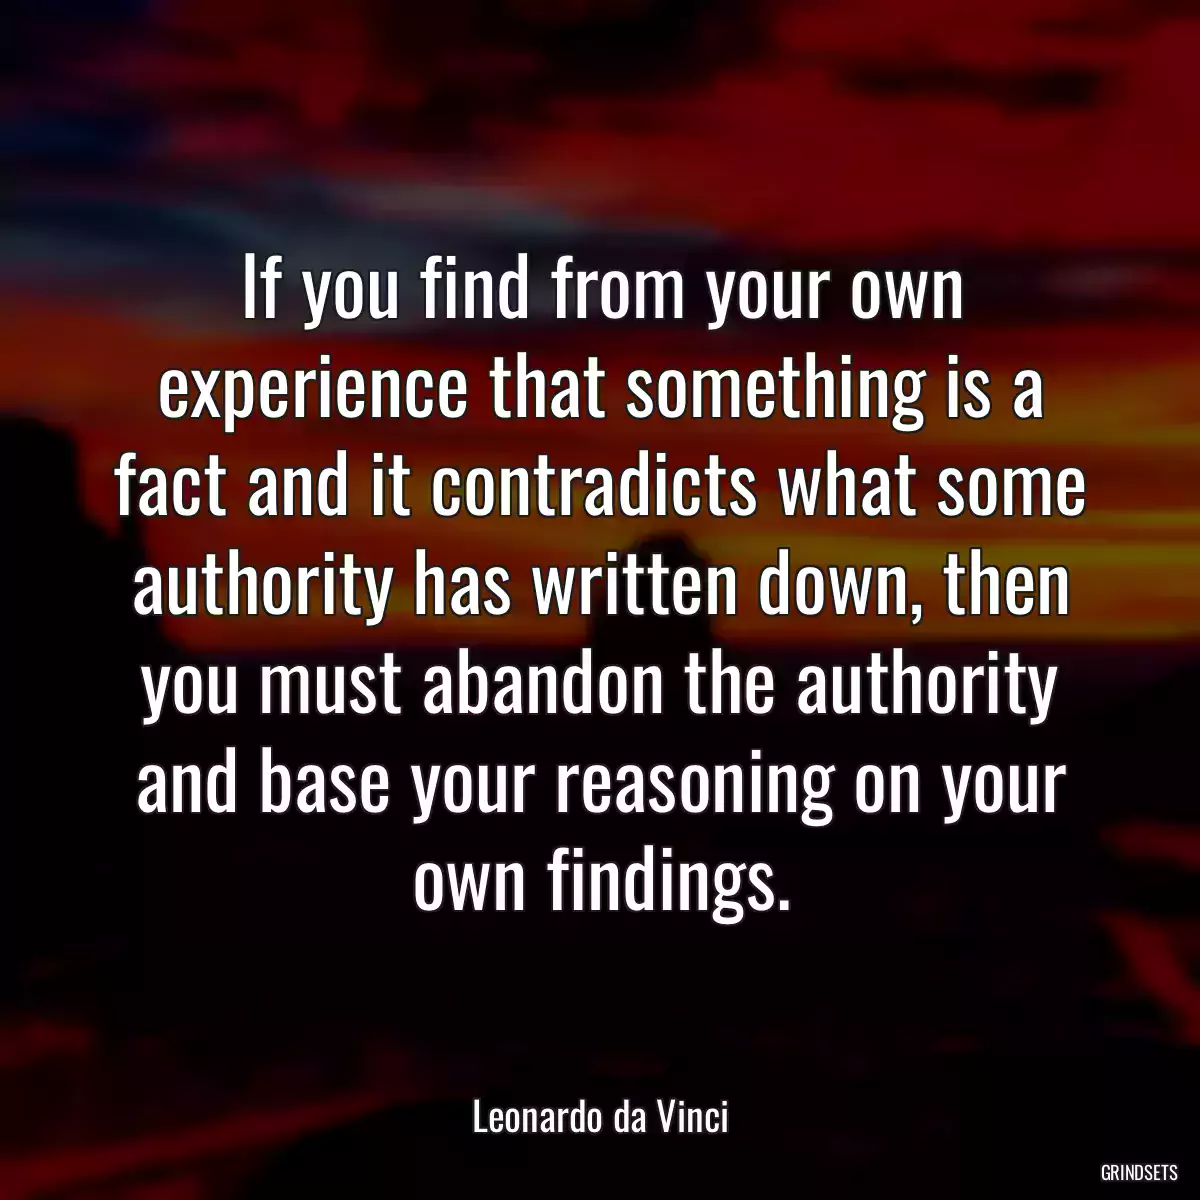 If you find from your own experience that something is a fact and it contradicts what some authority has written down, then you must abandon the authority and base your reasoning on your own findings.